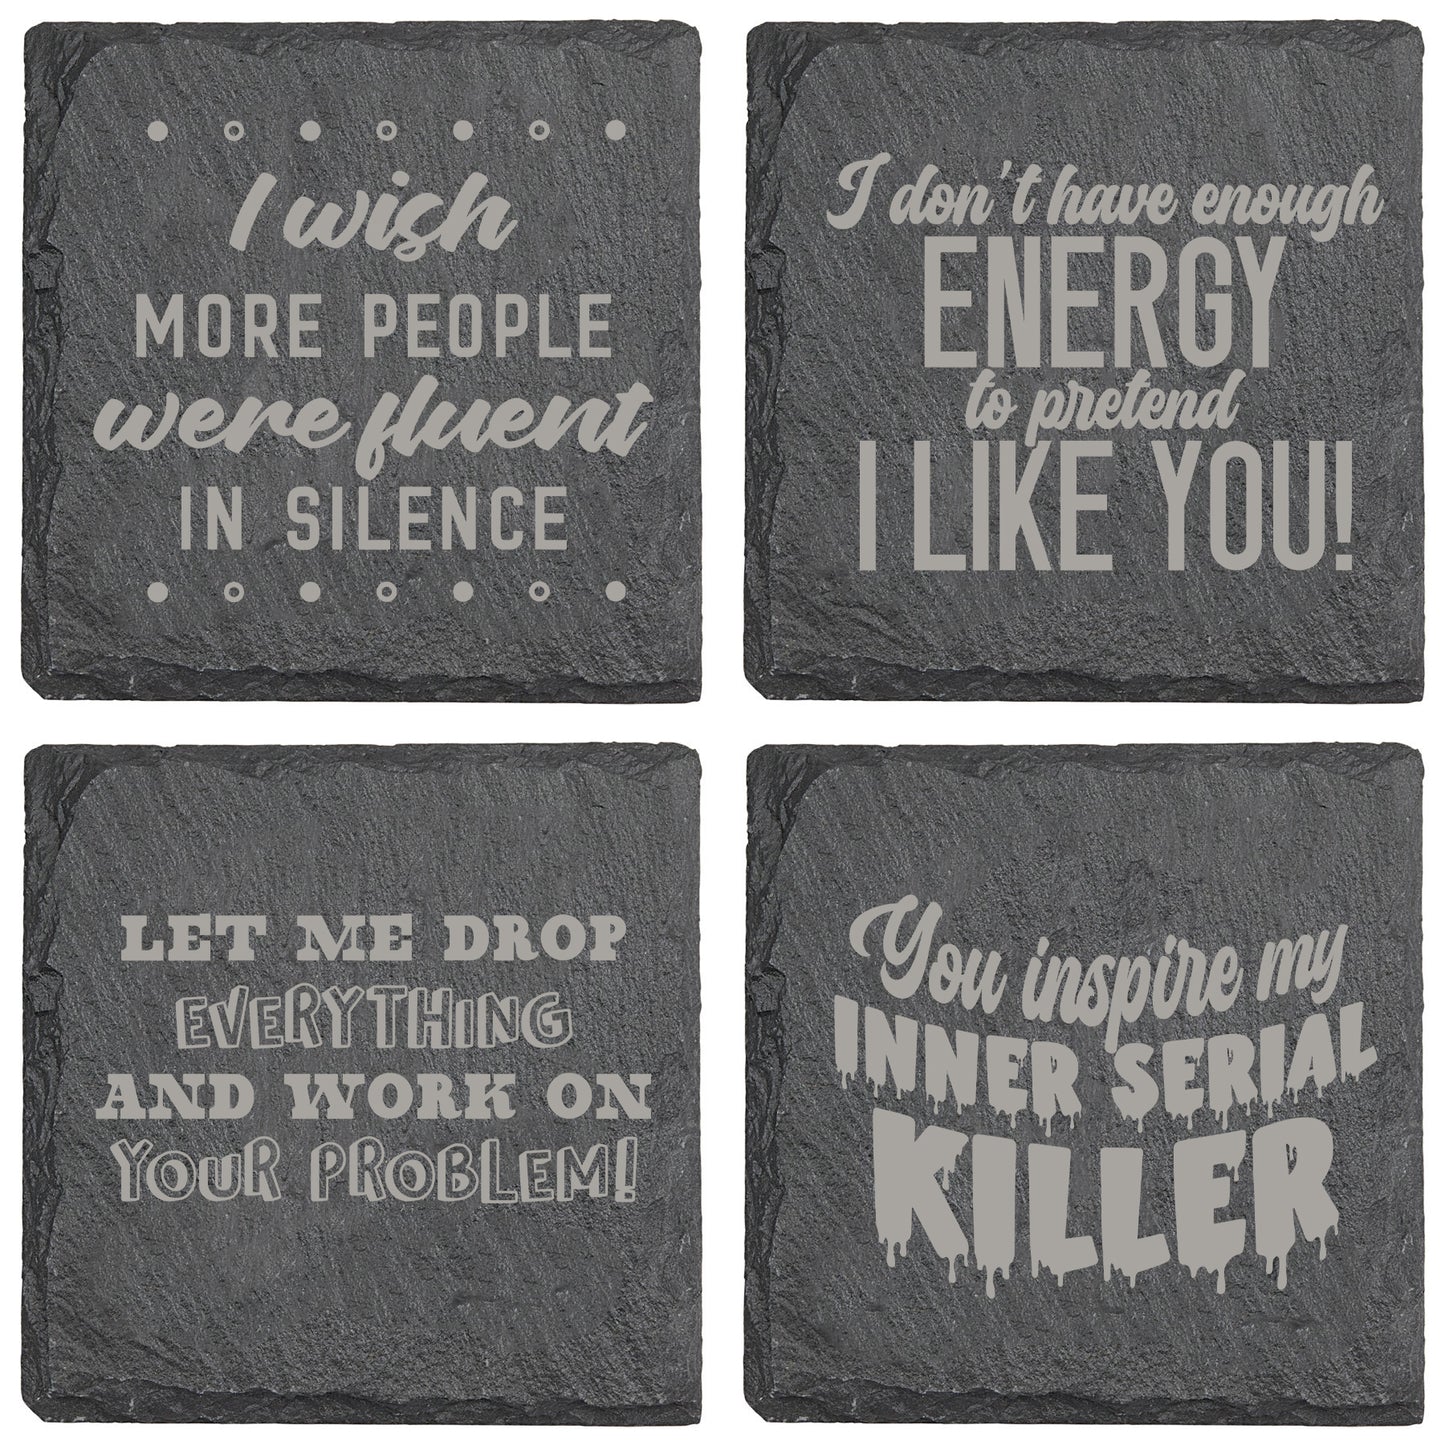 I Wish More People Were Fluent in Silence Slate Coaster